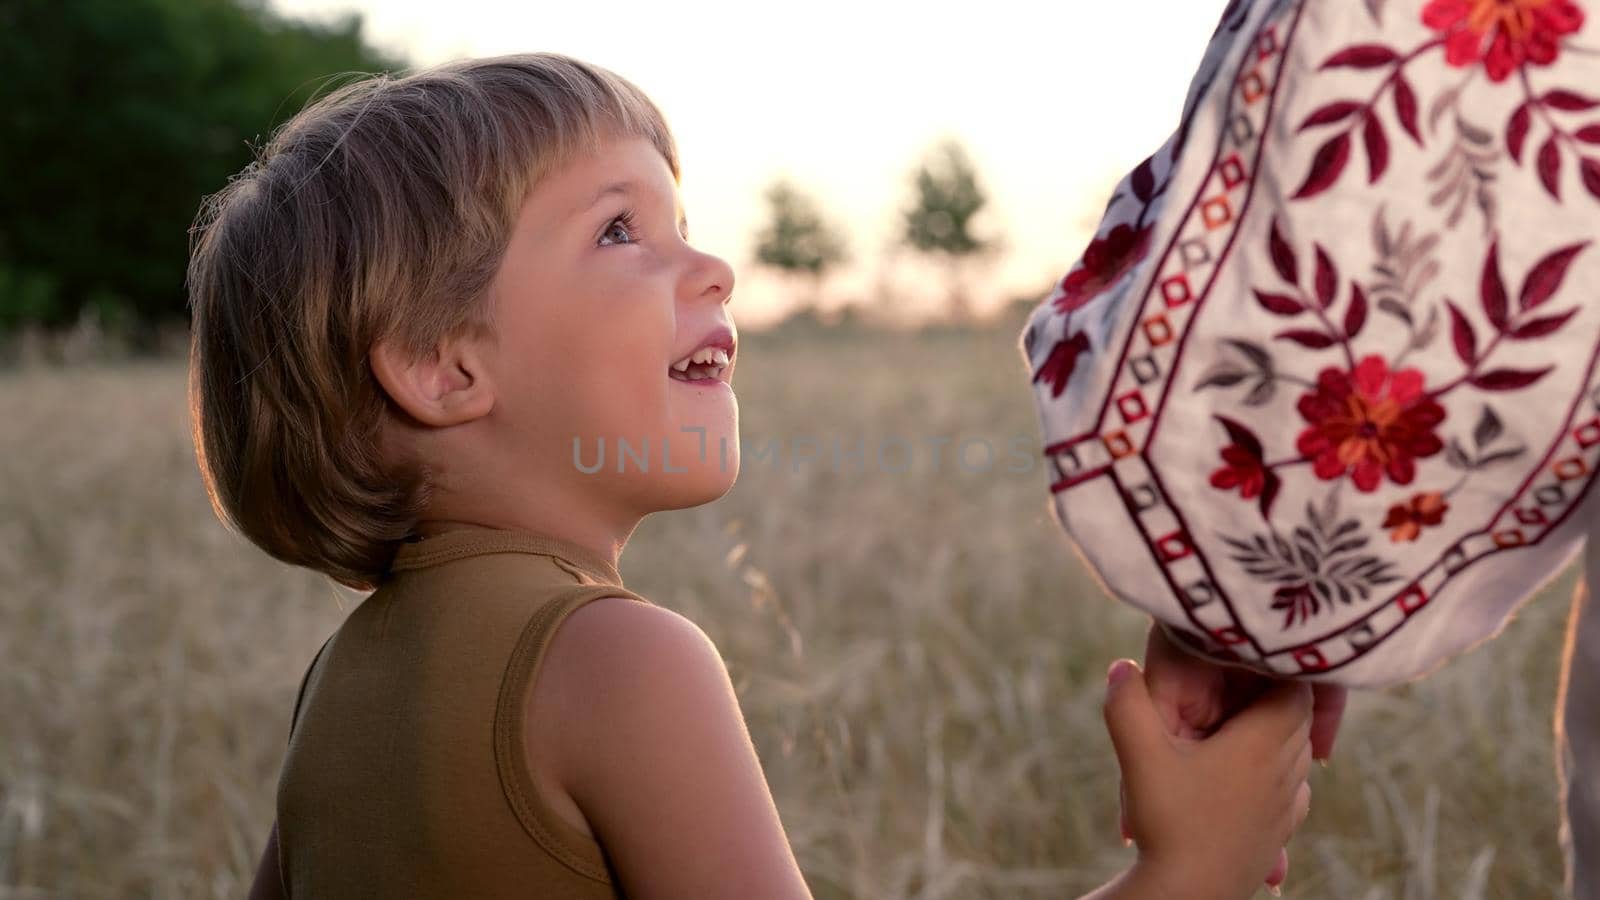 Mom and child holding hands together on wheat field sunset background. Son takes mother hand. Family, trust, love and happiness concept. High quality photo